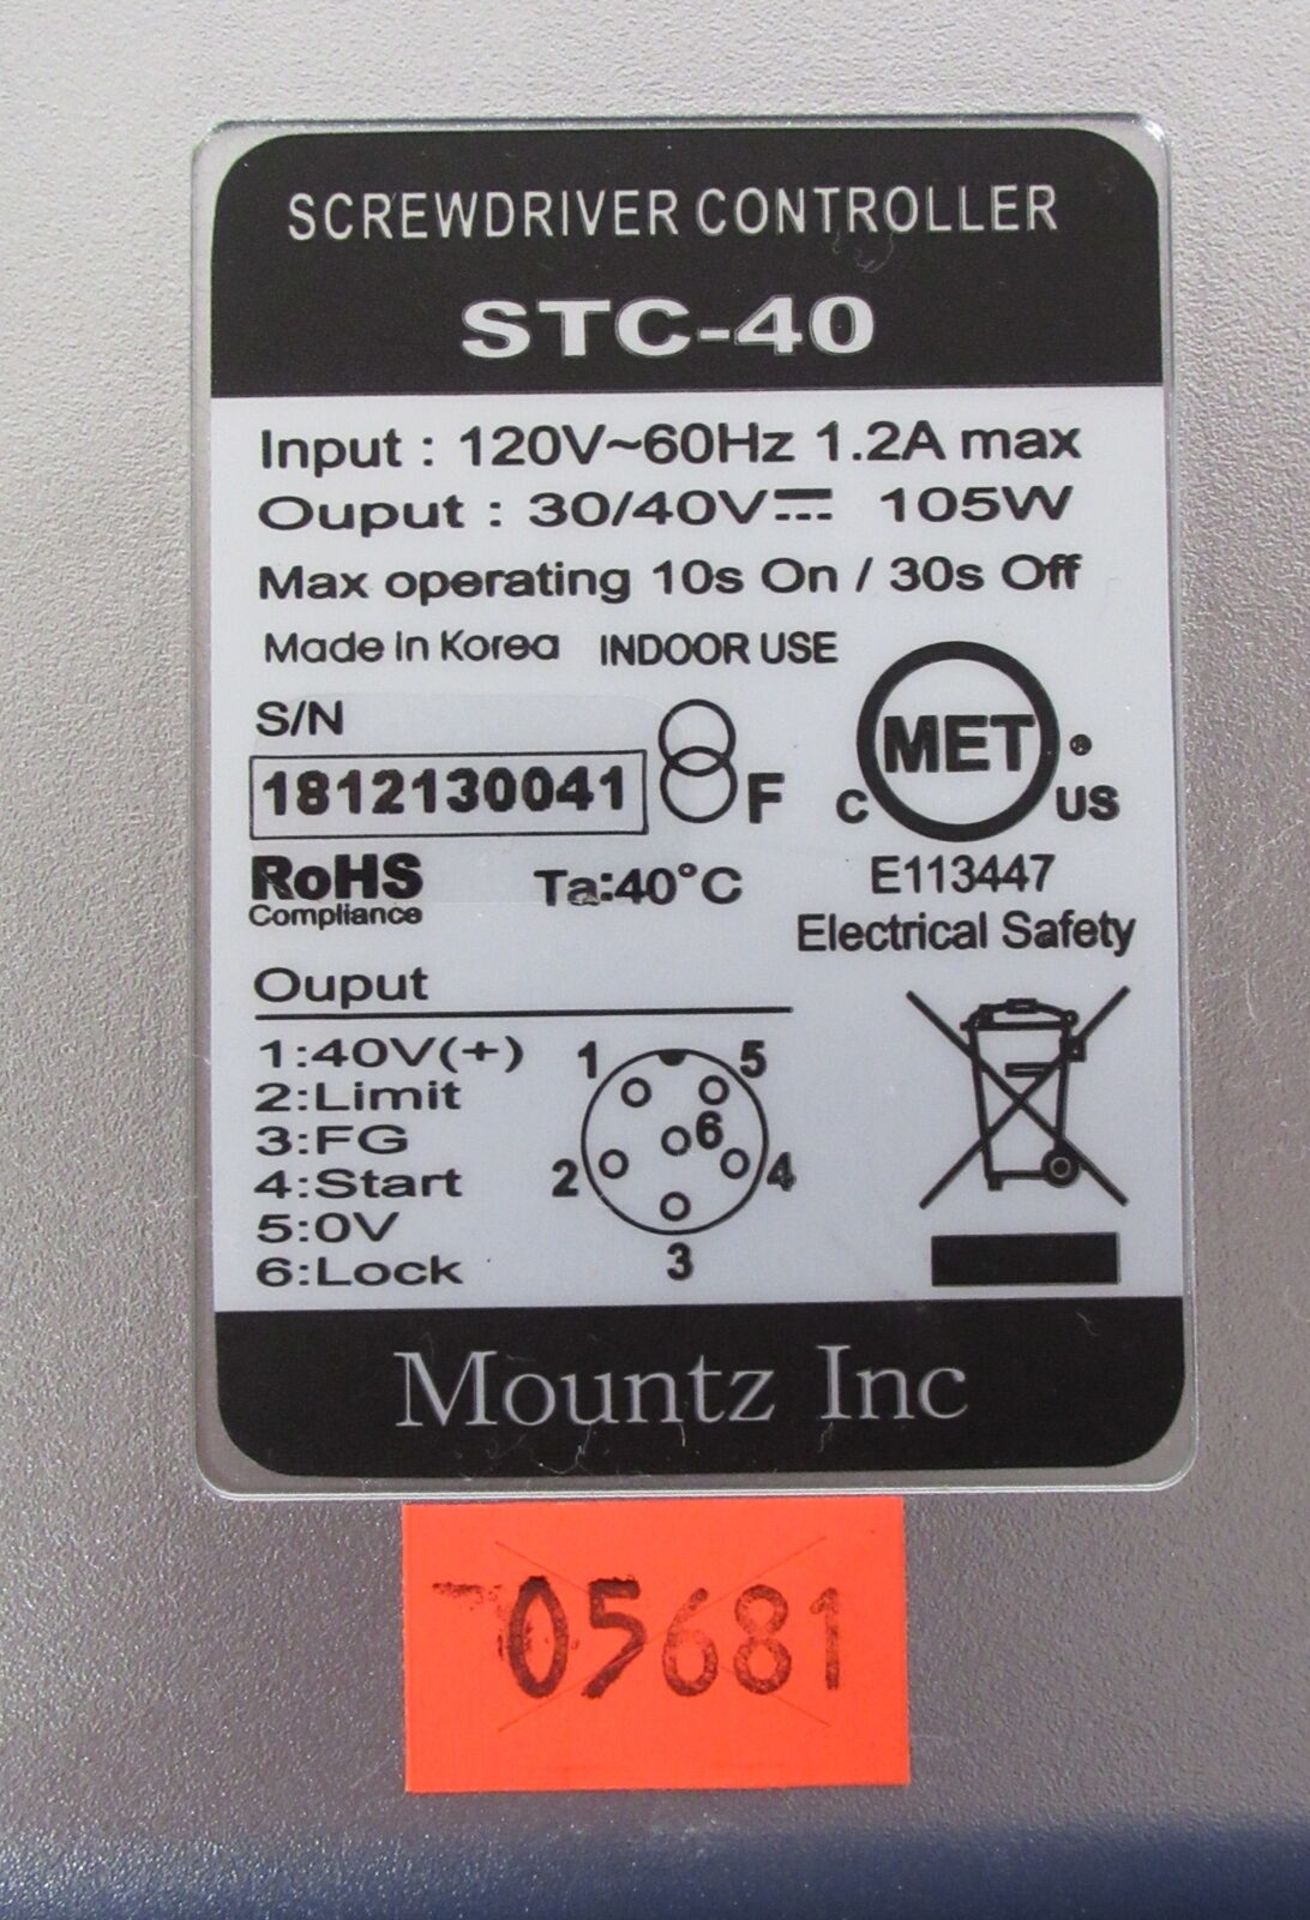 Mountz LF120-A ESD Electric Screwdriver w/ STC-40 Controller - Image 7 of 7